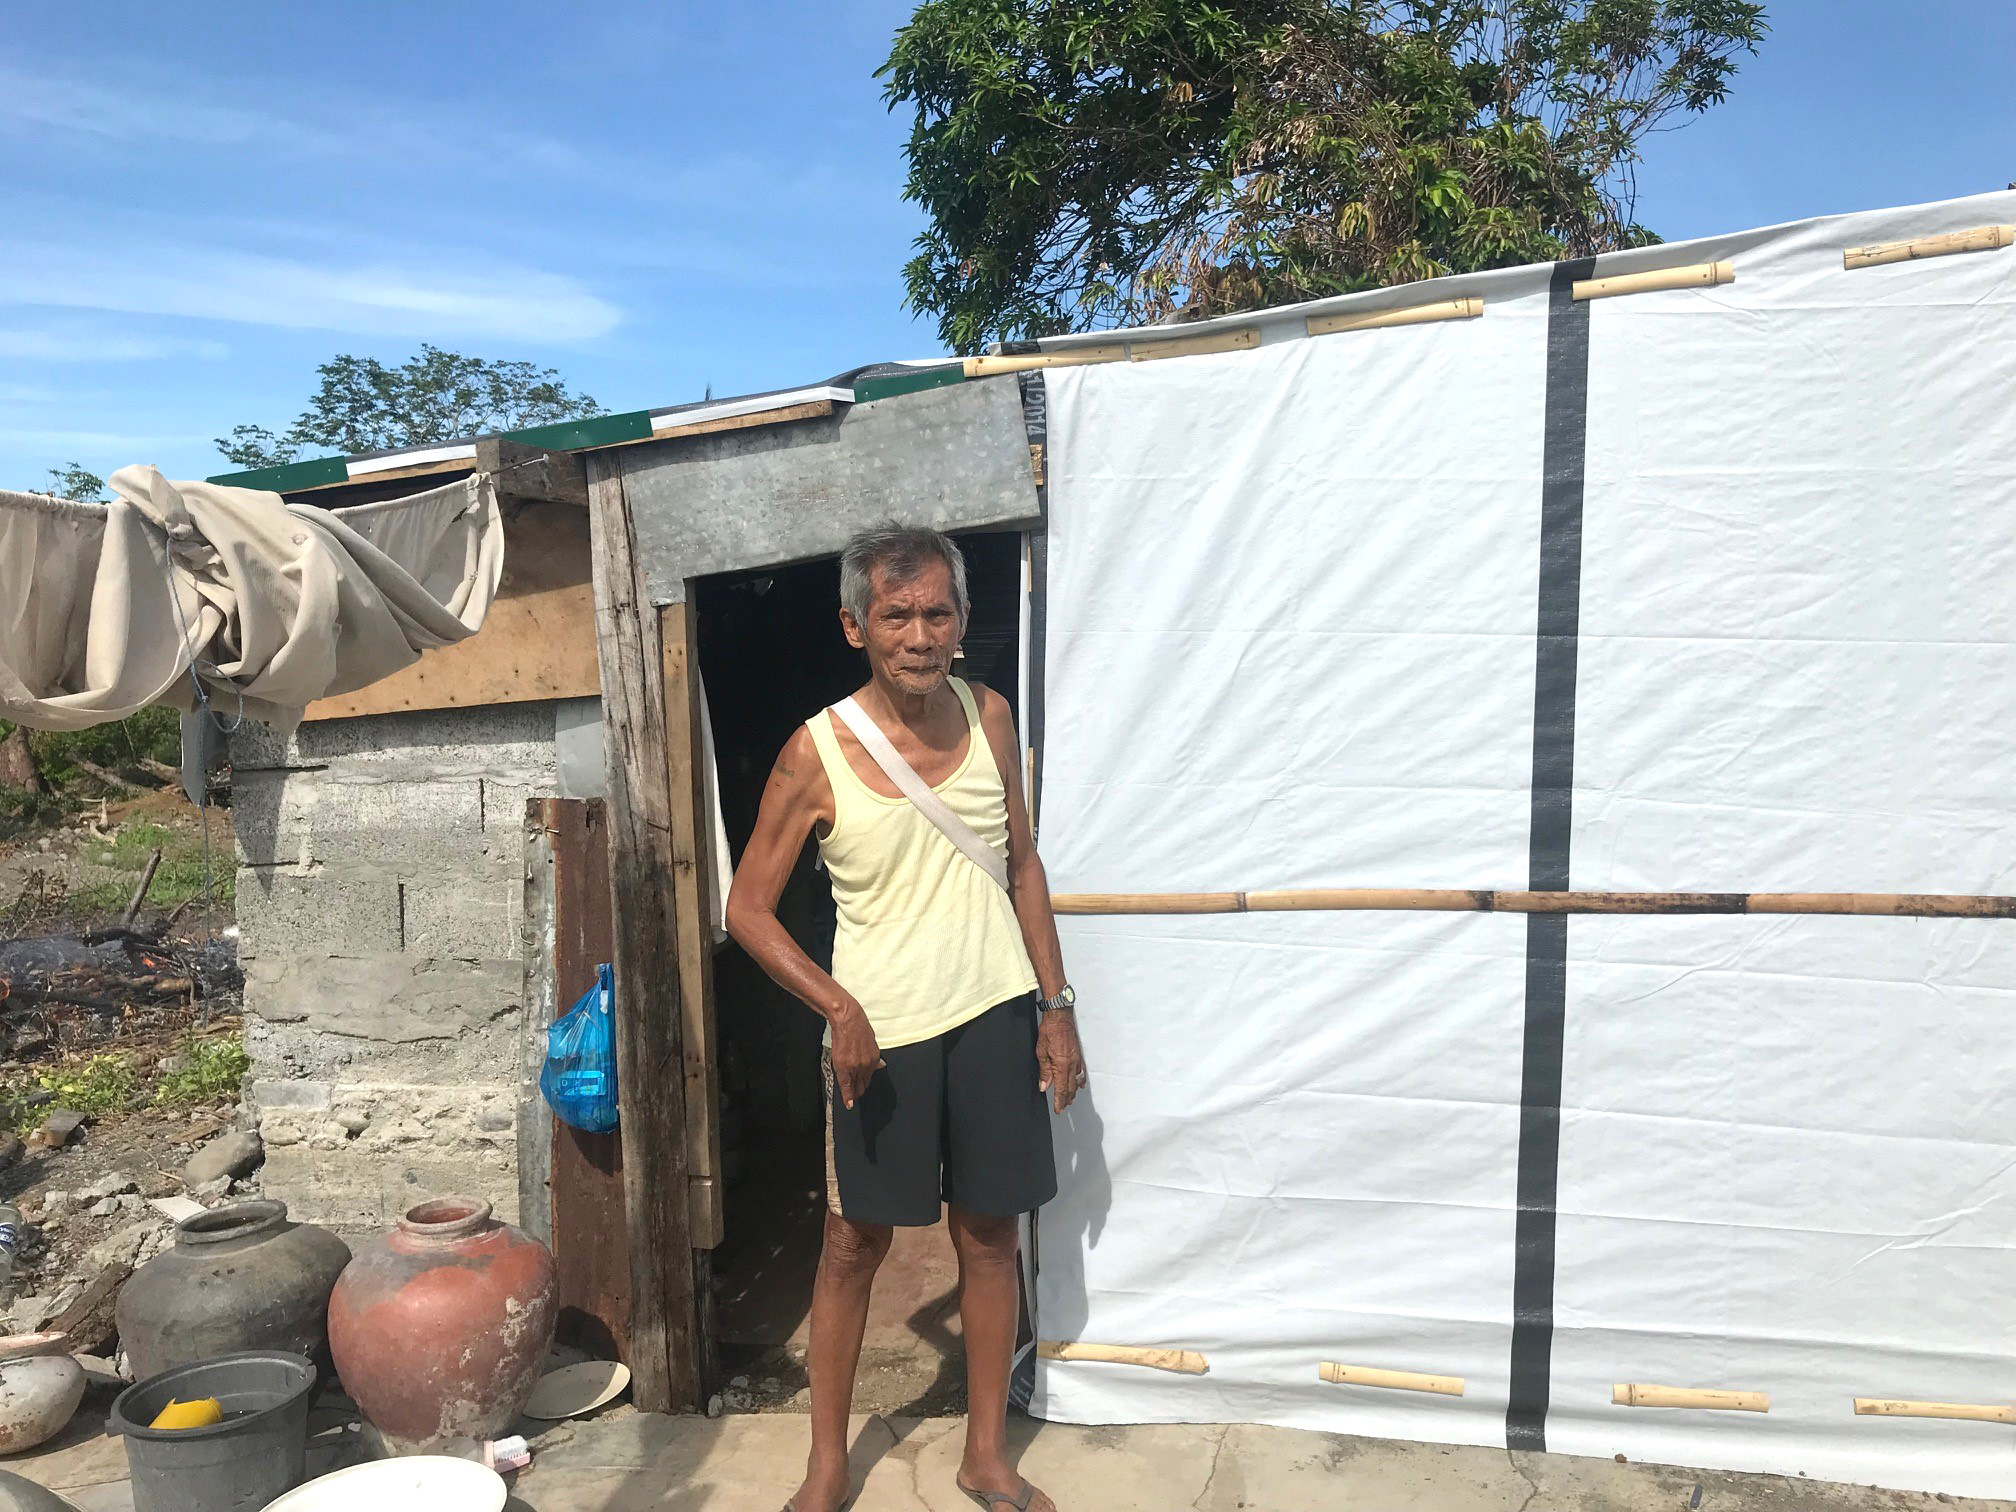 Ricardo told the ShelterBox team that the ShelterKit was one of the most important aid items he and his wife had received. Without this aid, they would not have a space to call their own.